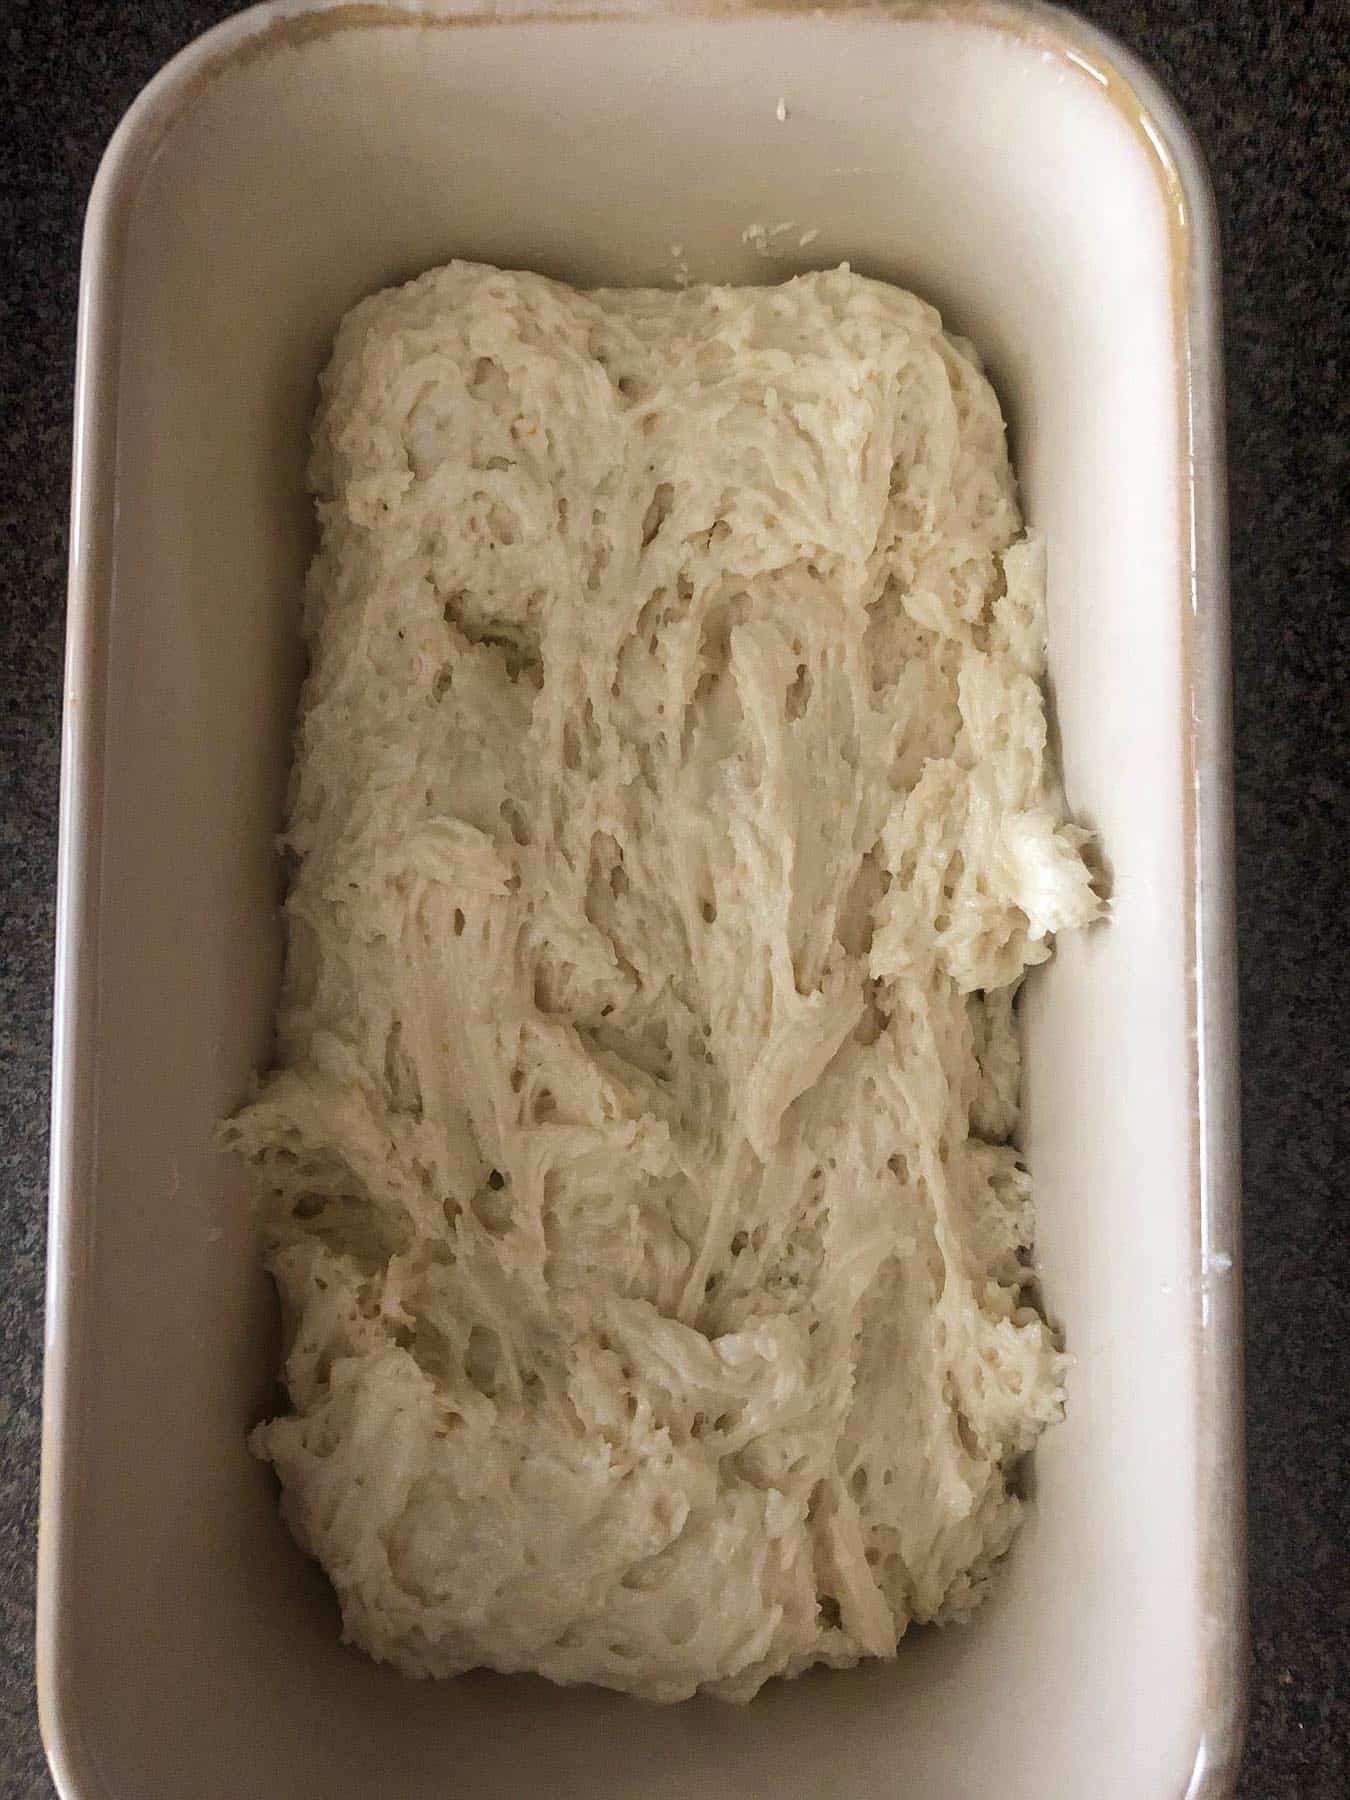 half the batter added to the loaf pan